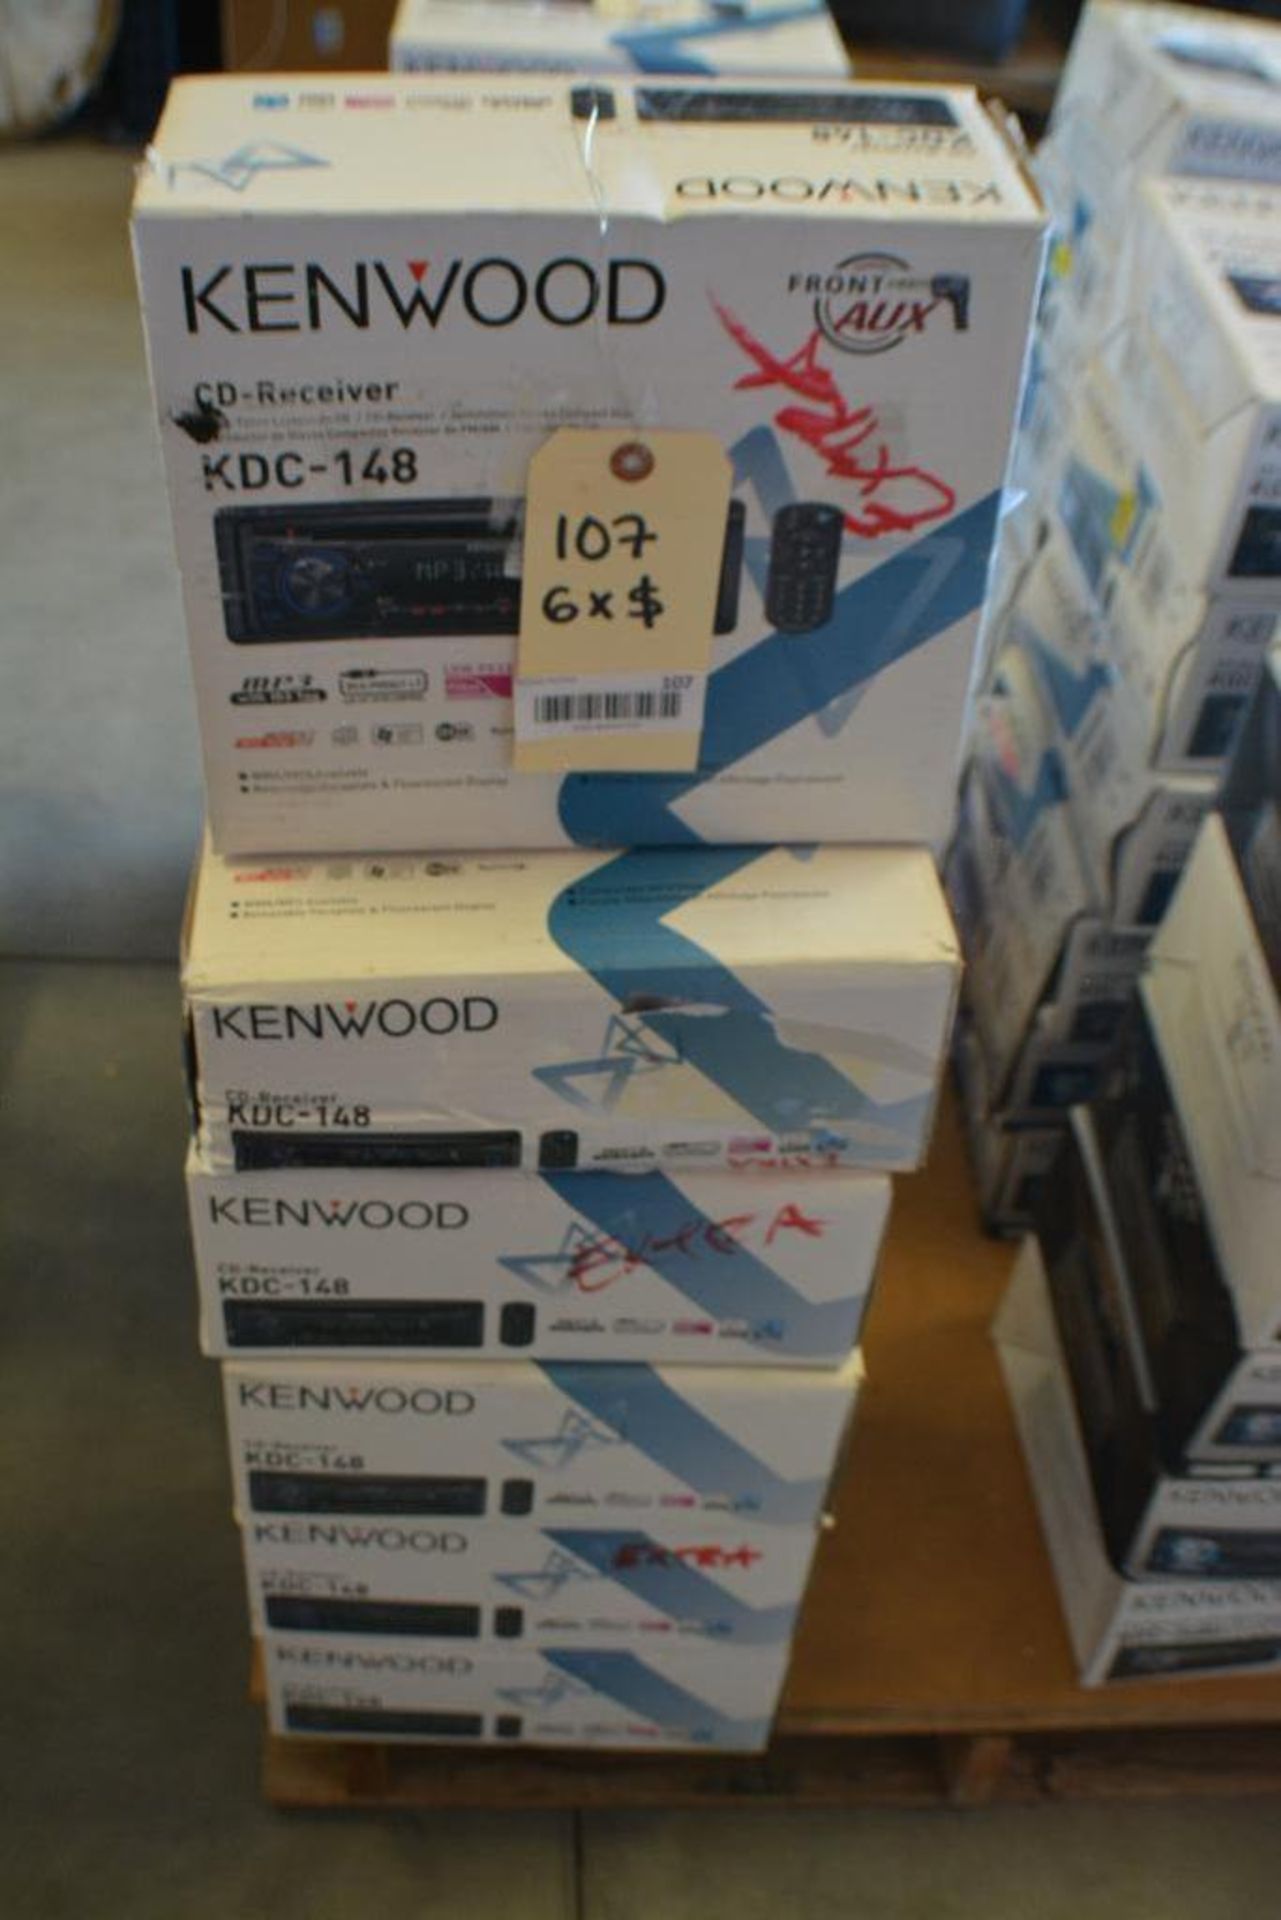 Kenwood Car Stereo Model KDC-148 CD-Receiver + MP3 Aux. Port.(Some stereos not in original box). Qty